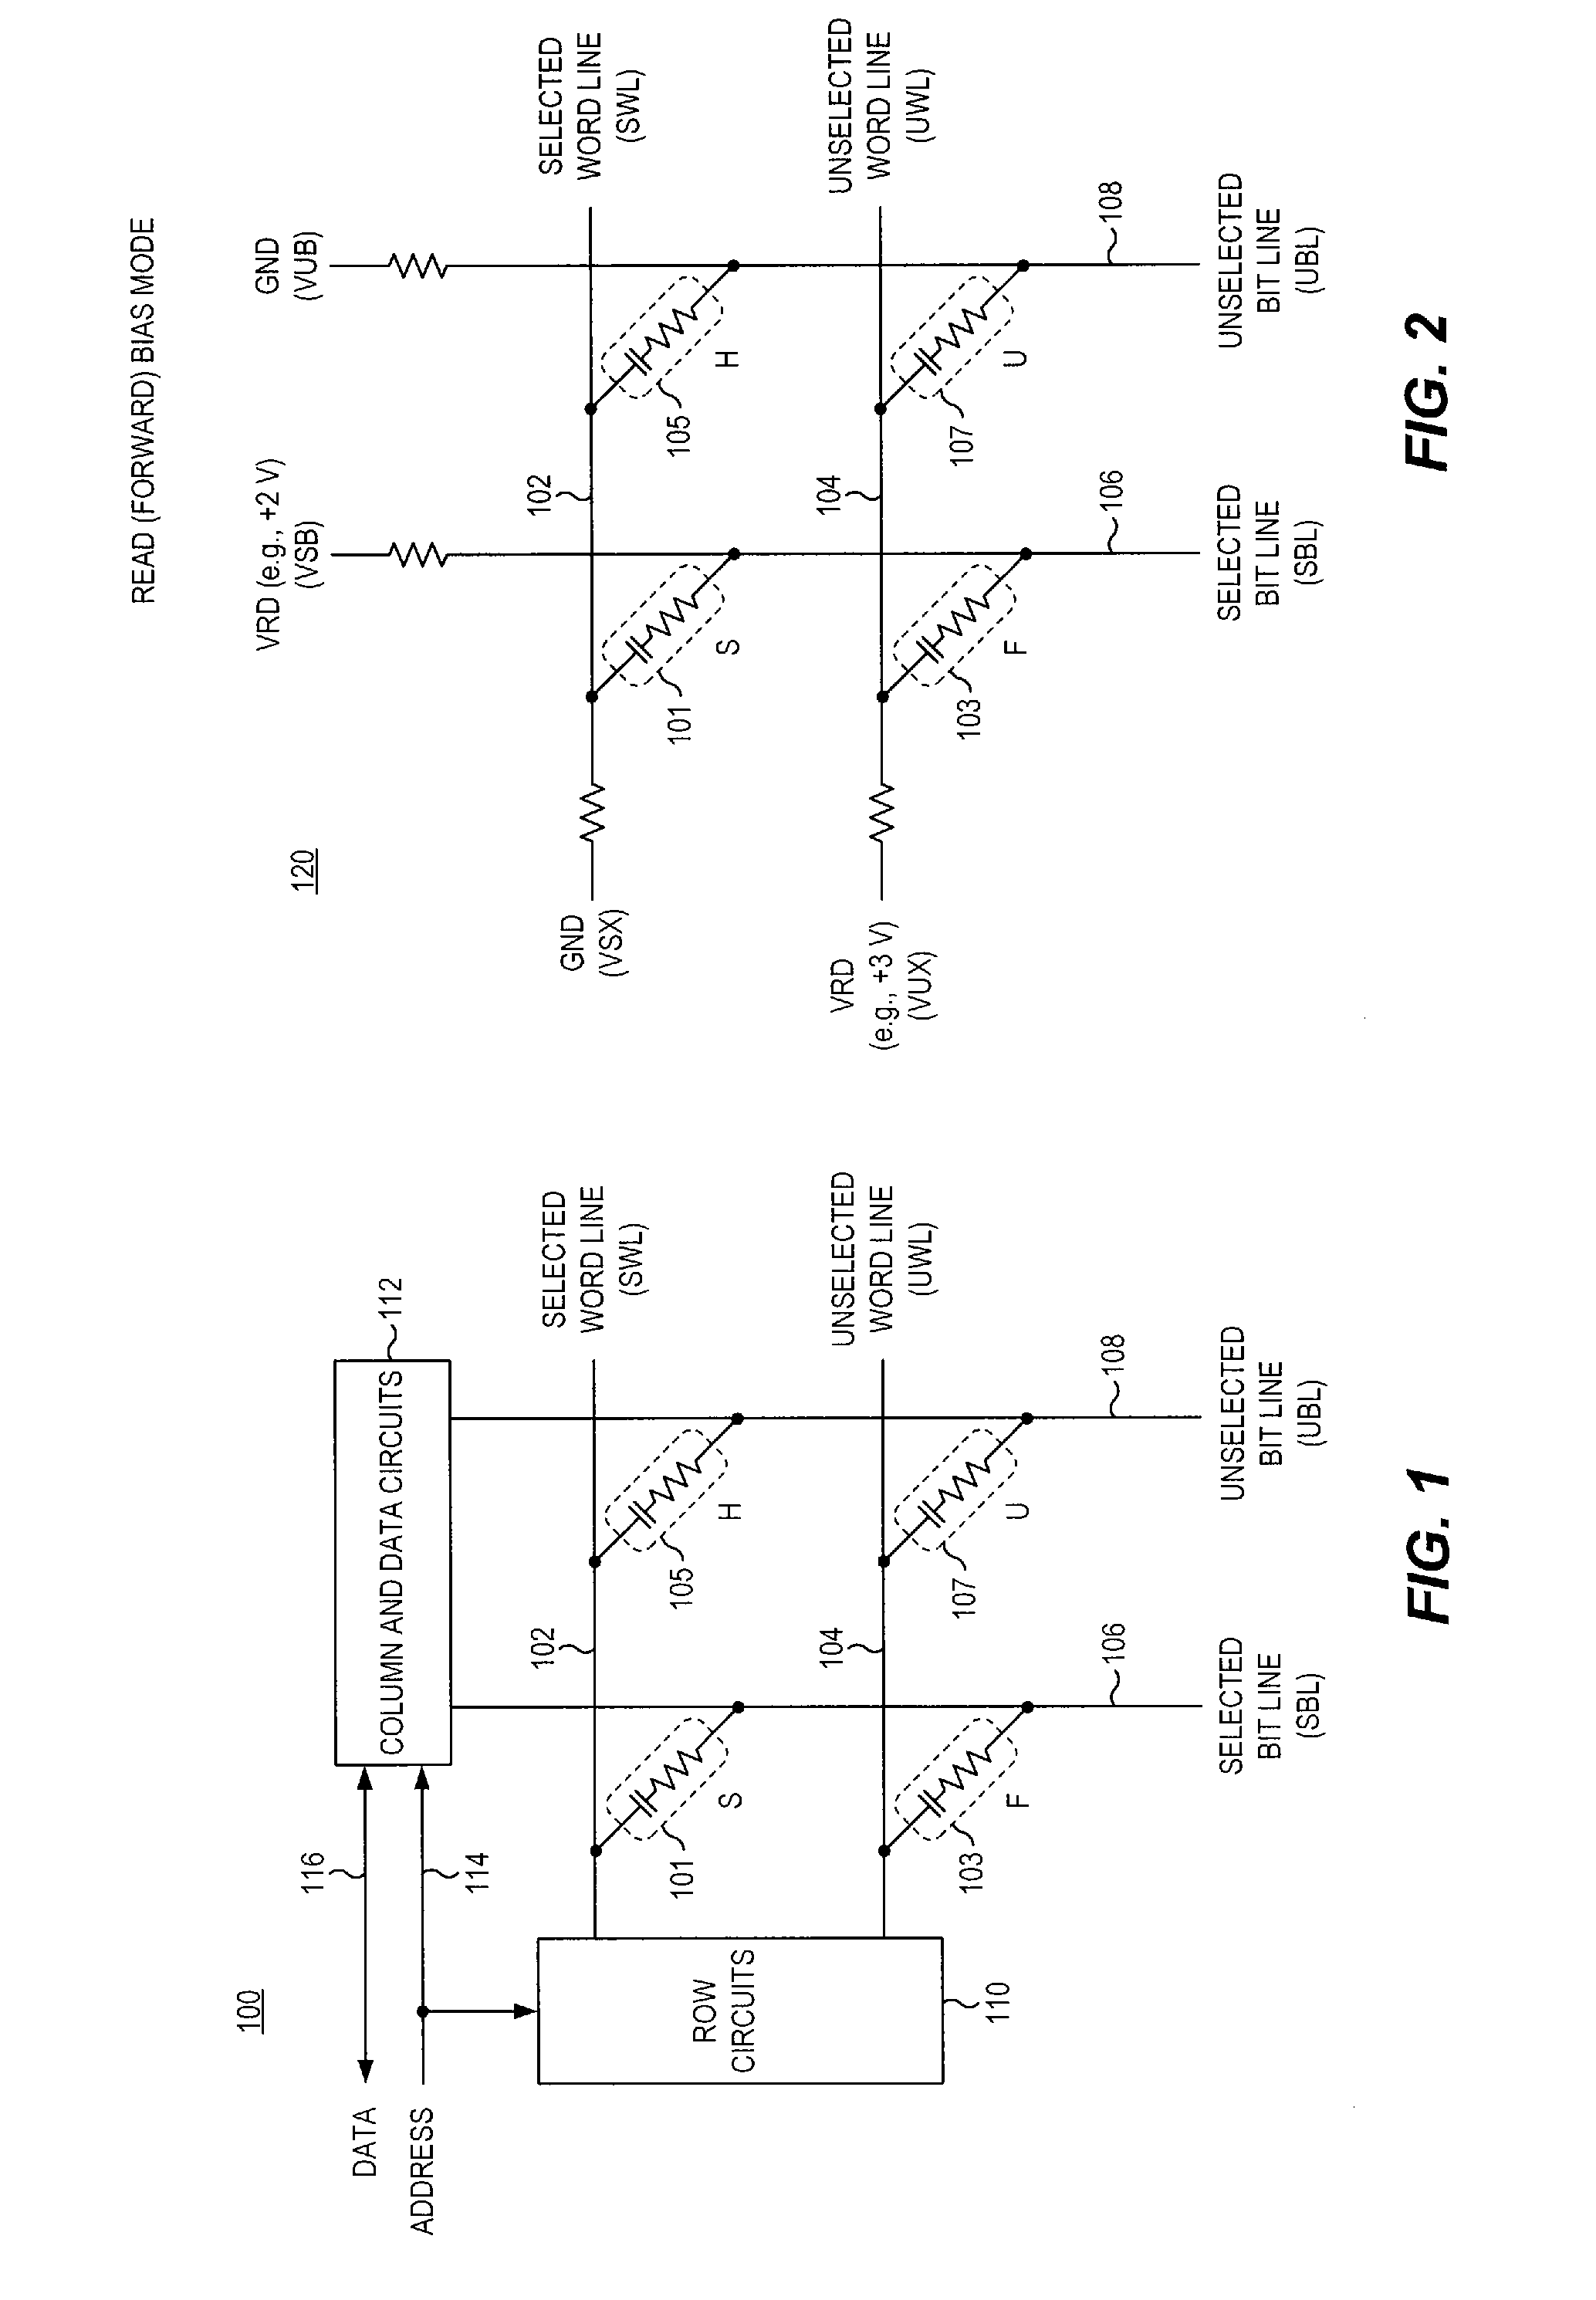 Method for reading a multi-level passive element memory cell array